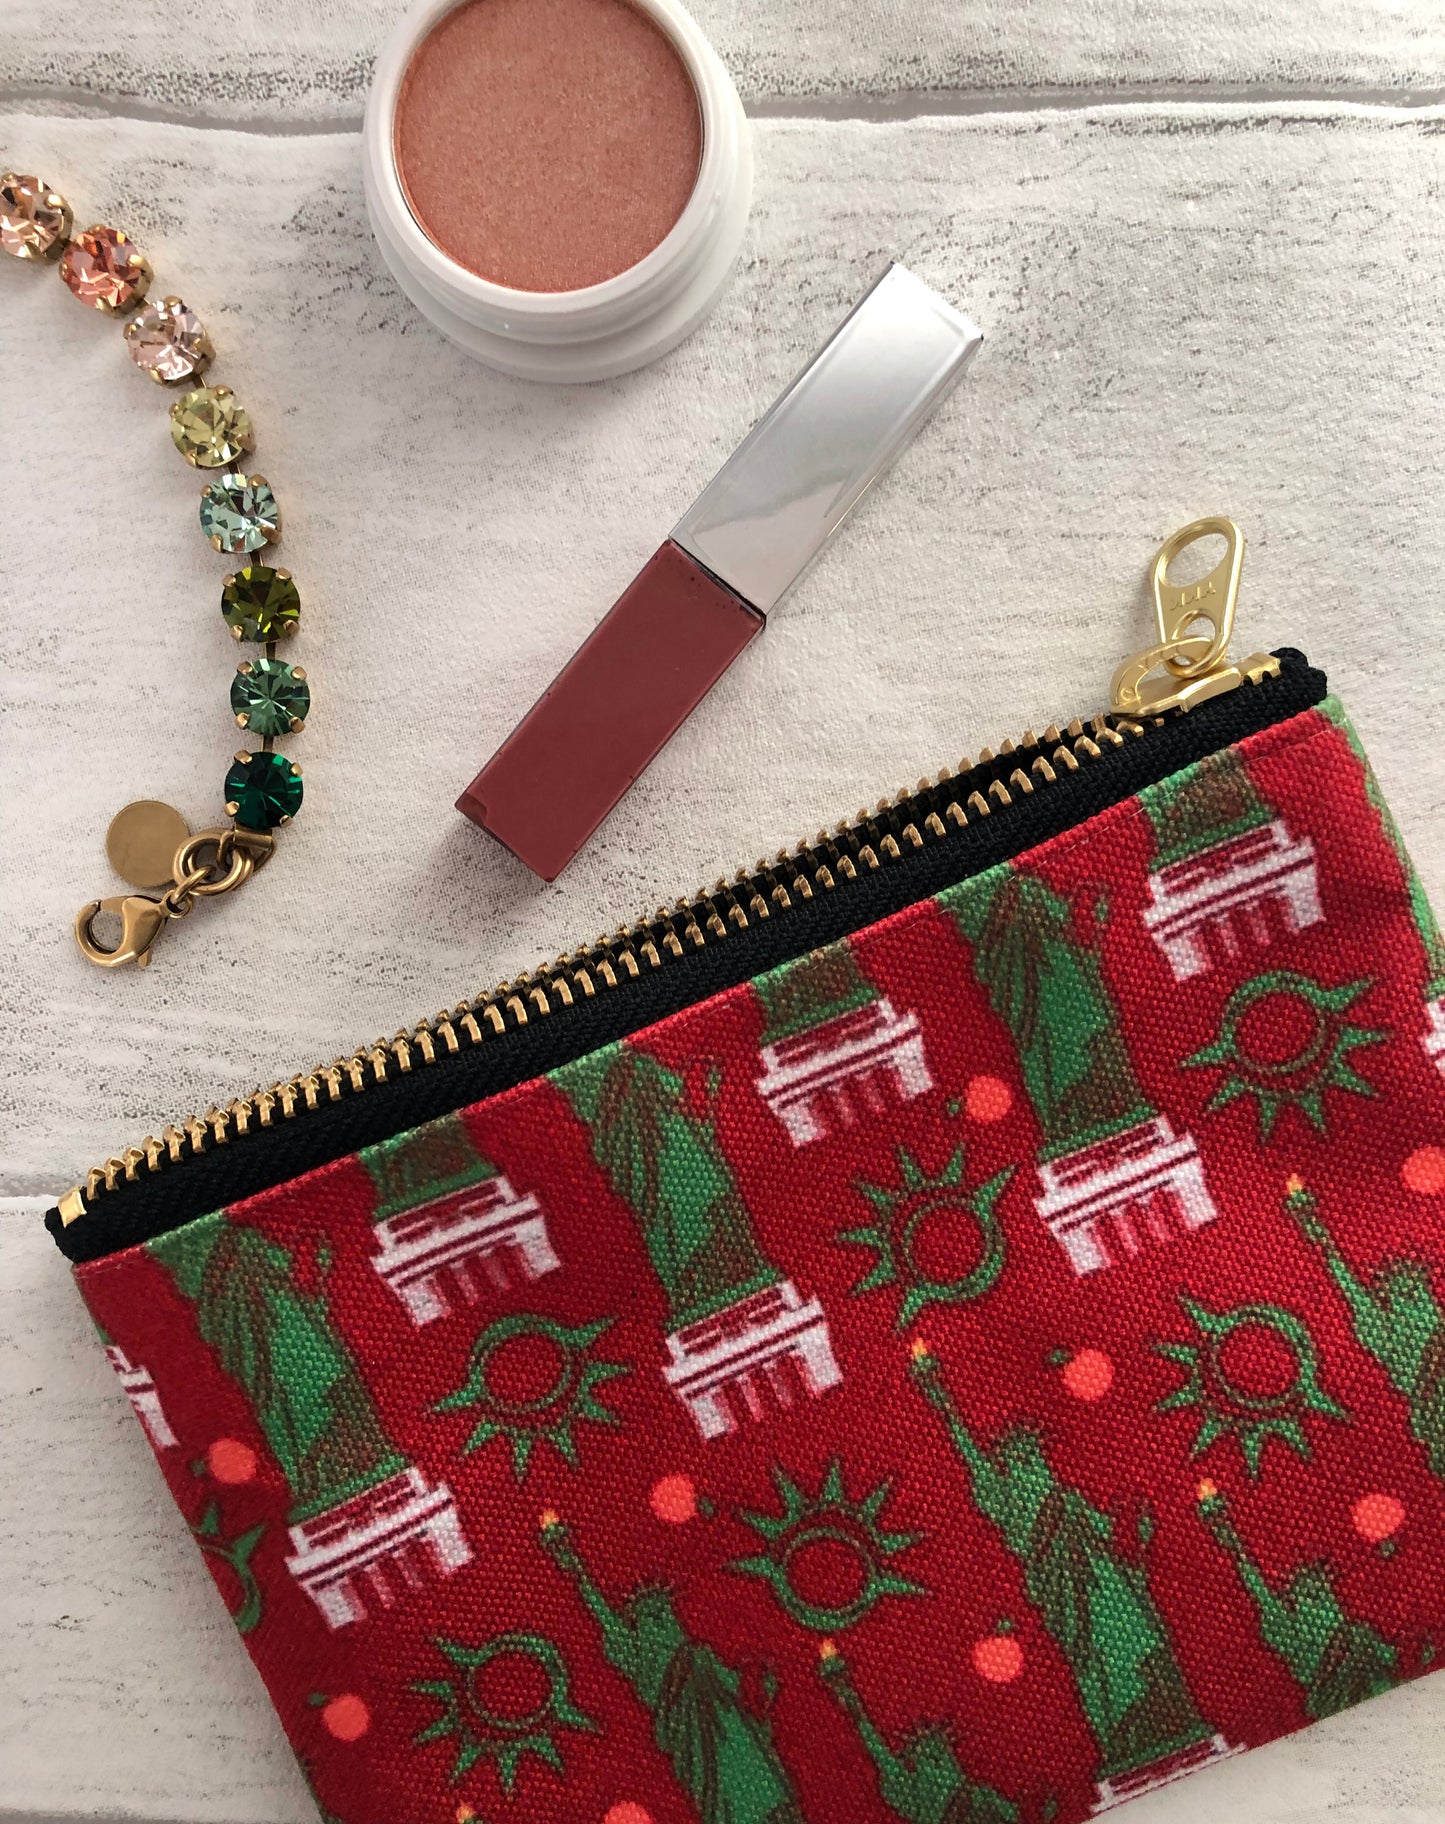 Handy zip pouch in a bold red colour with a statue of liberty design